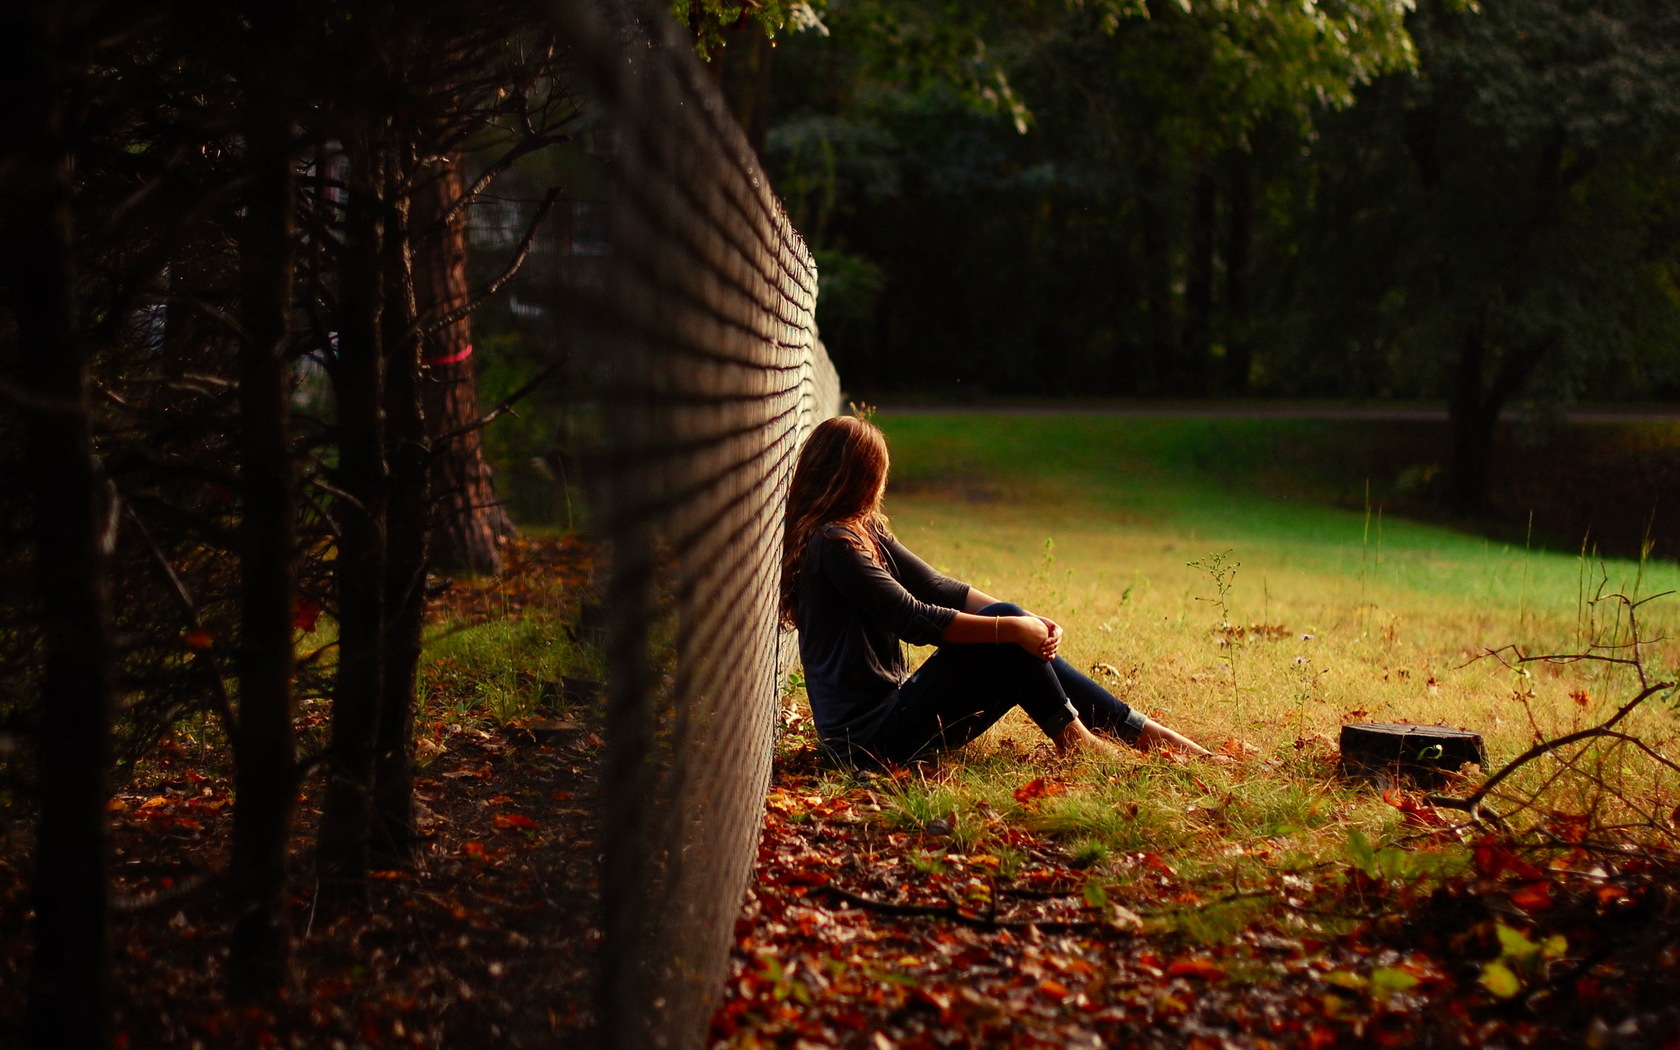 other females, Females, Women, Girls, Models, Mood, Situations, Landscapes, Fence, Autumn, Fall, Seasons, People Wallpaper